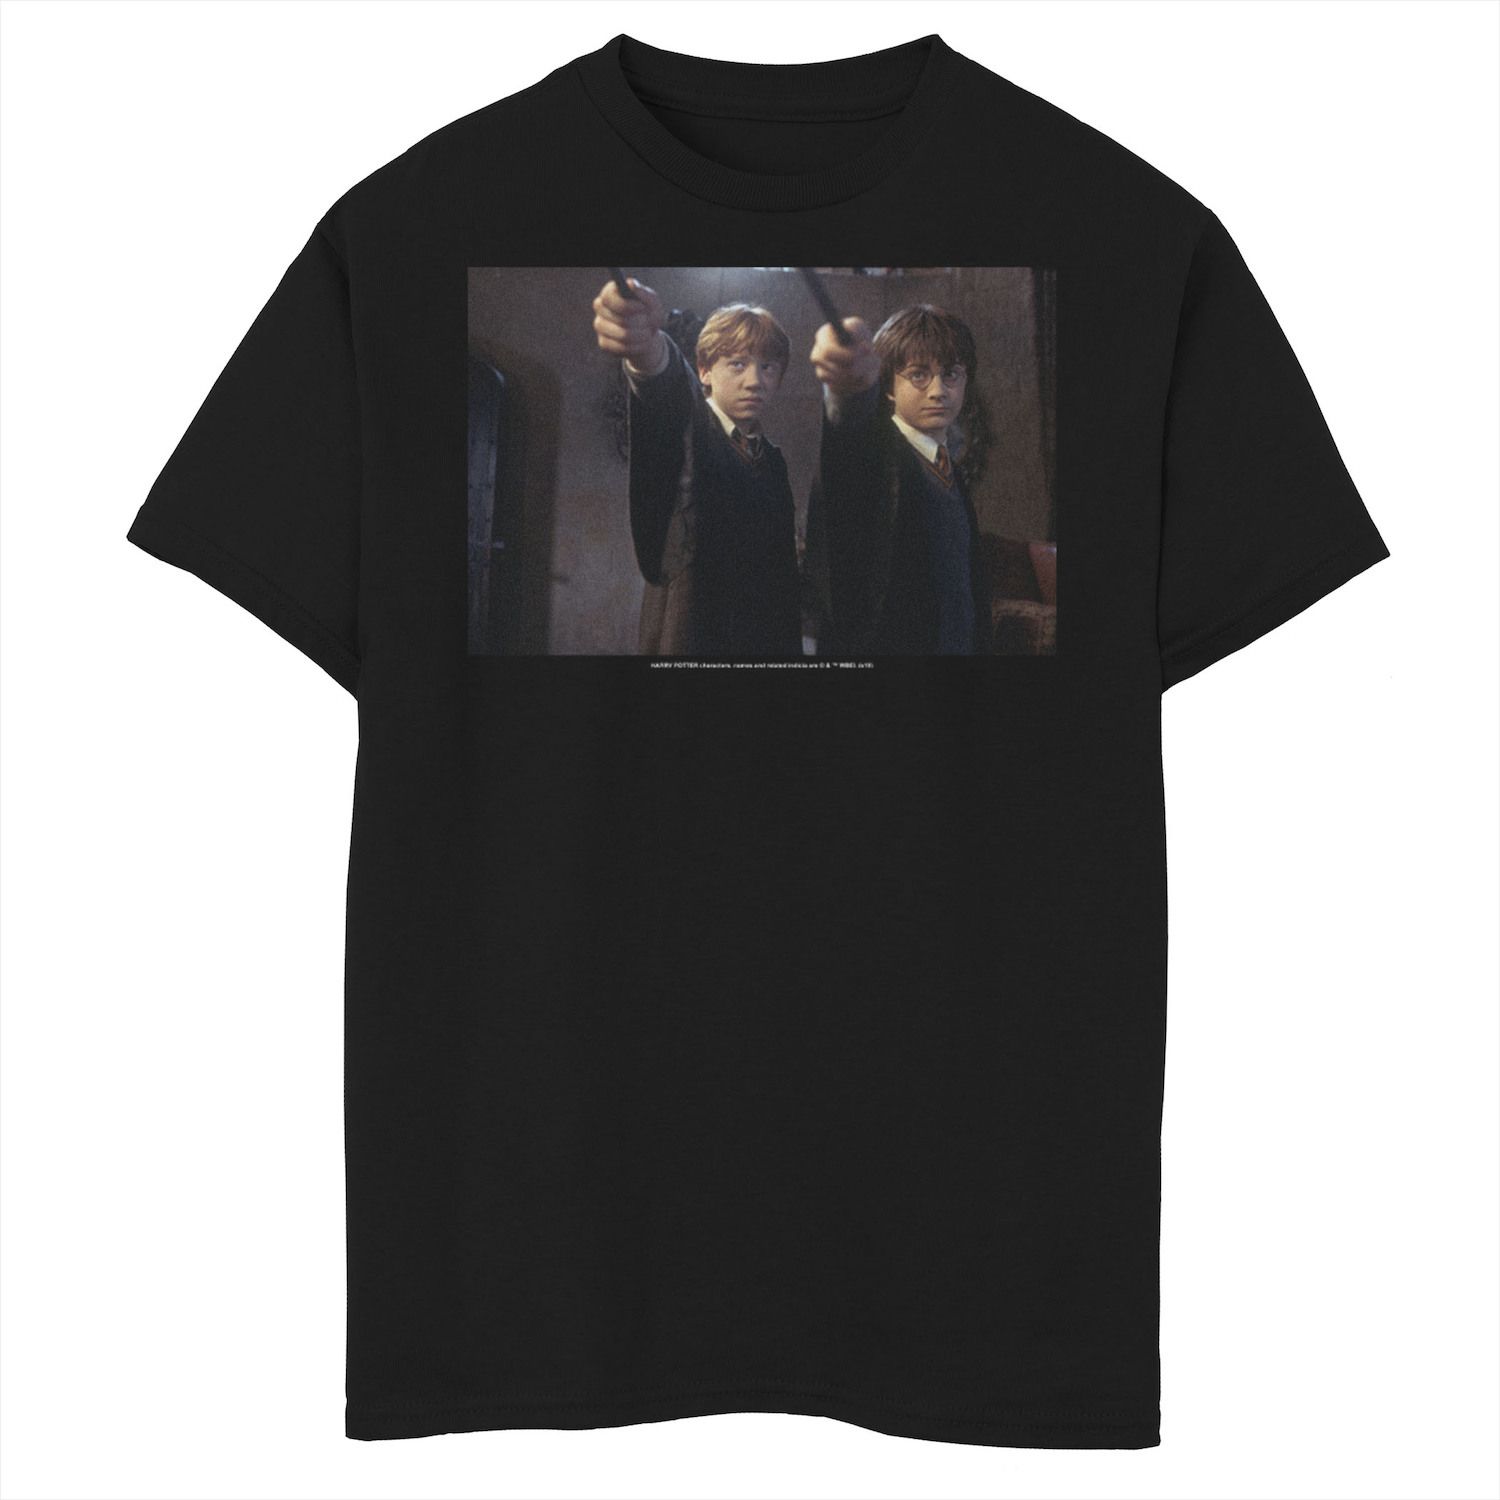 Image for Harry Potter Boys 8-20 Casting Spell Group Shot Poster Graphic Tee at Kohl's.